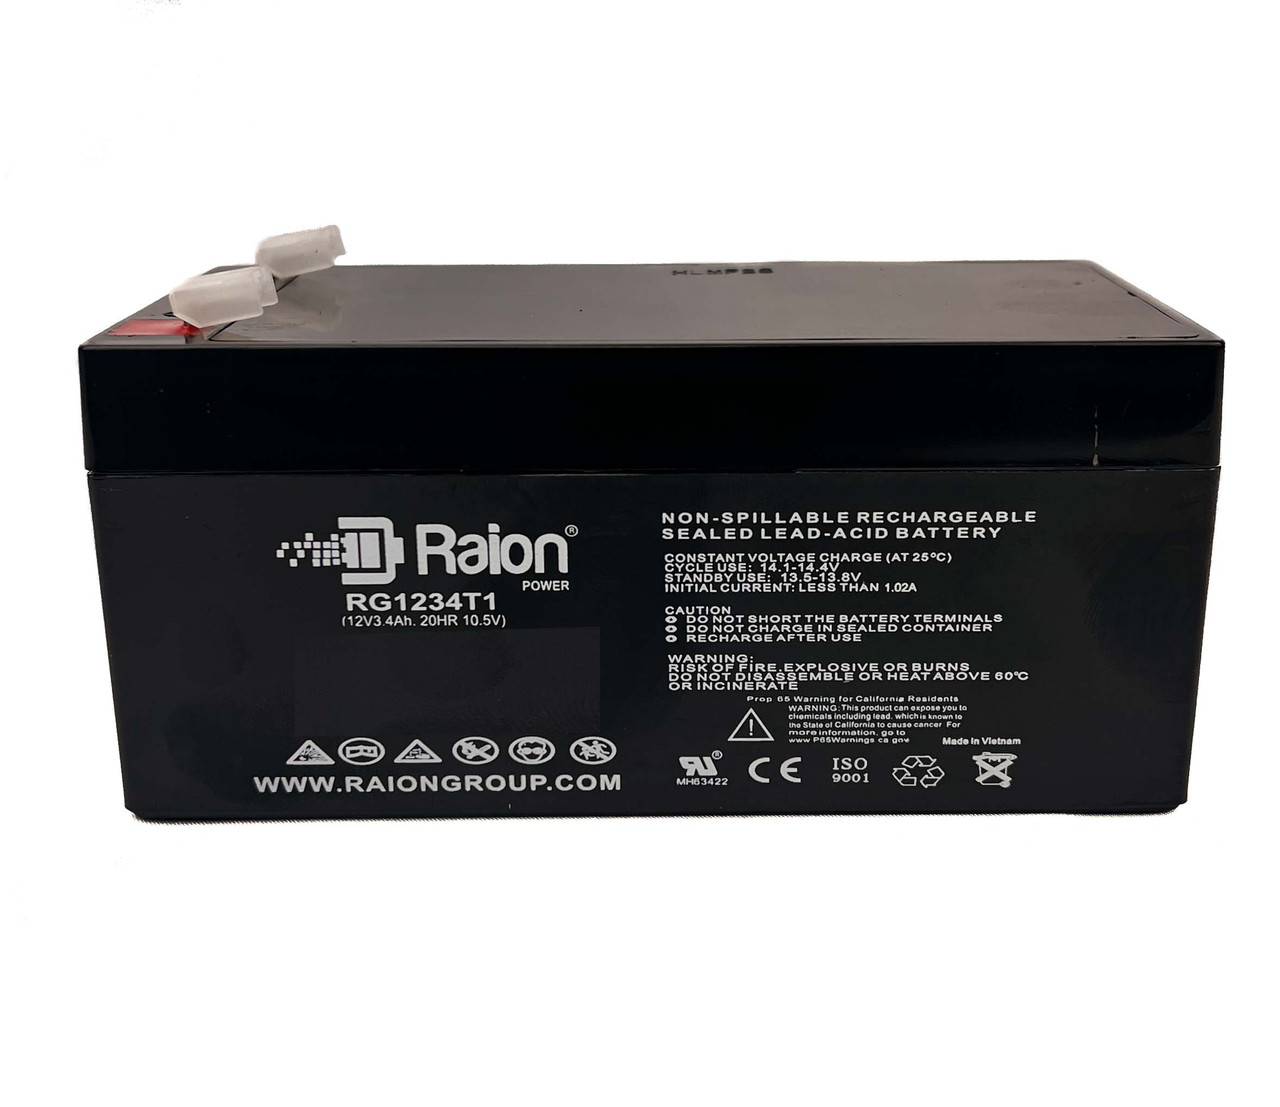 Raion Power RG1234T1 Rechargeable Compatible Replacement Battery for Baxter Healthcare Flo Guard 6301 Infusion Pump